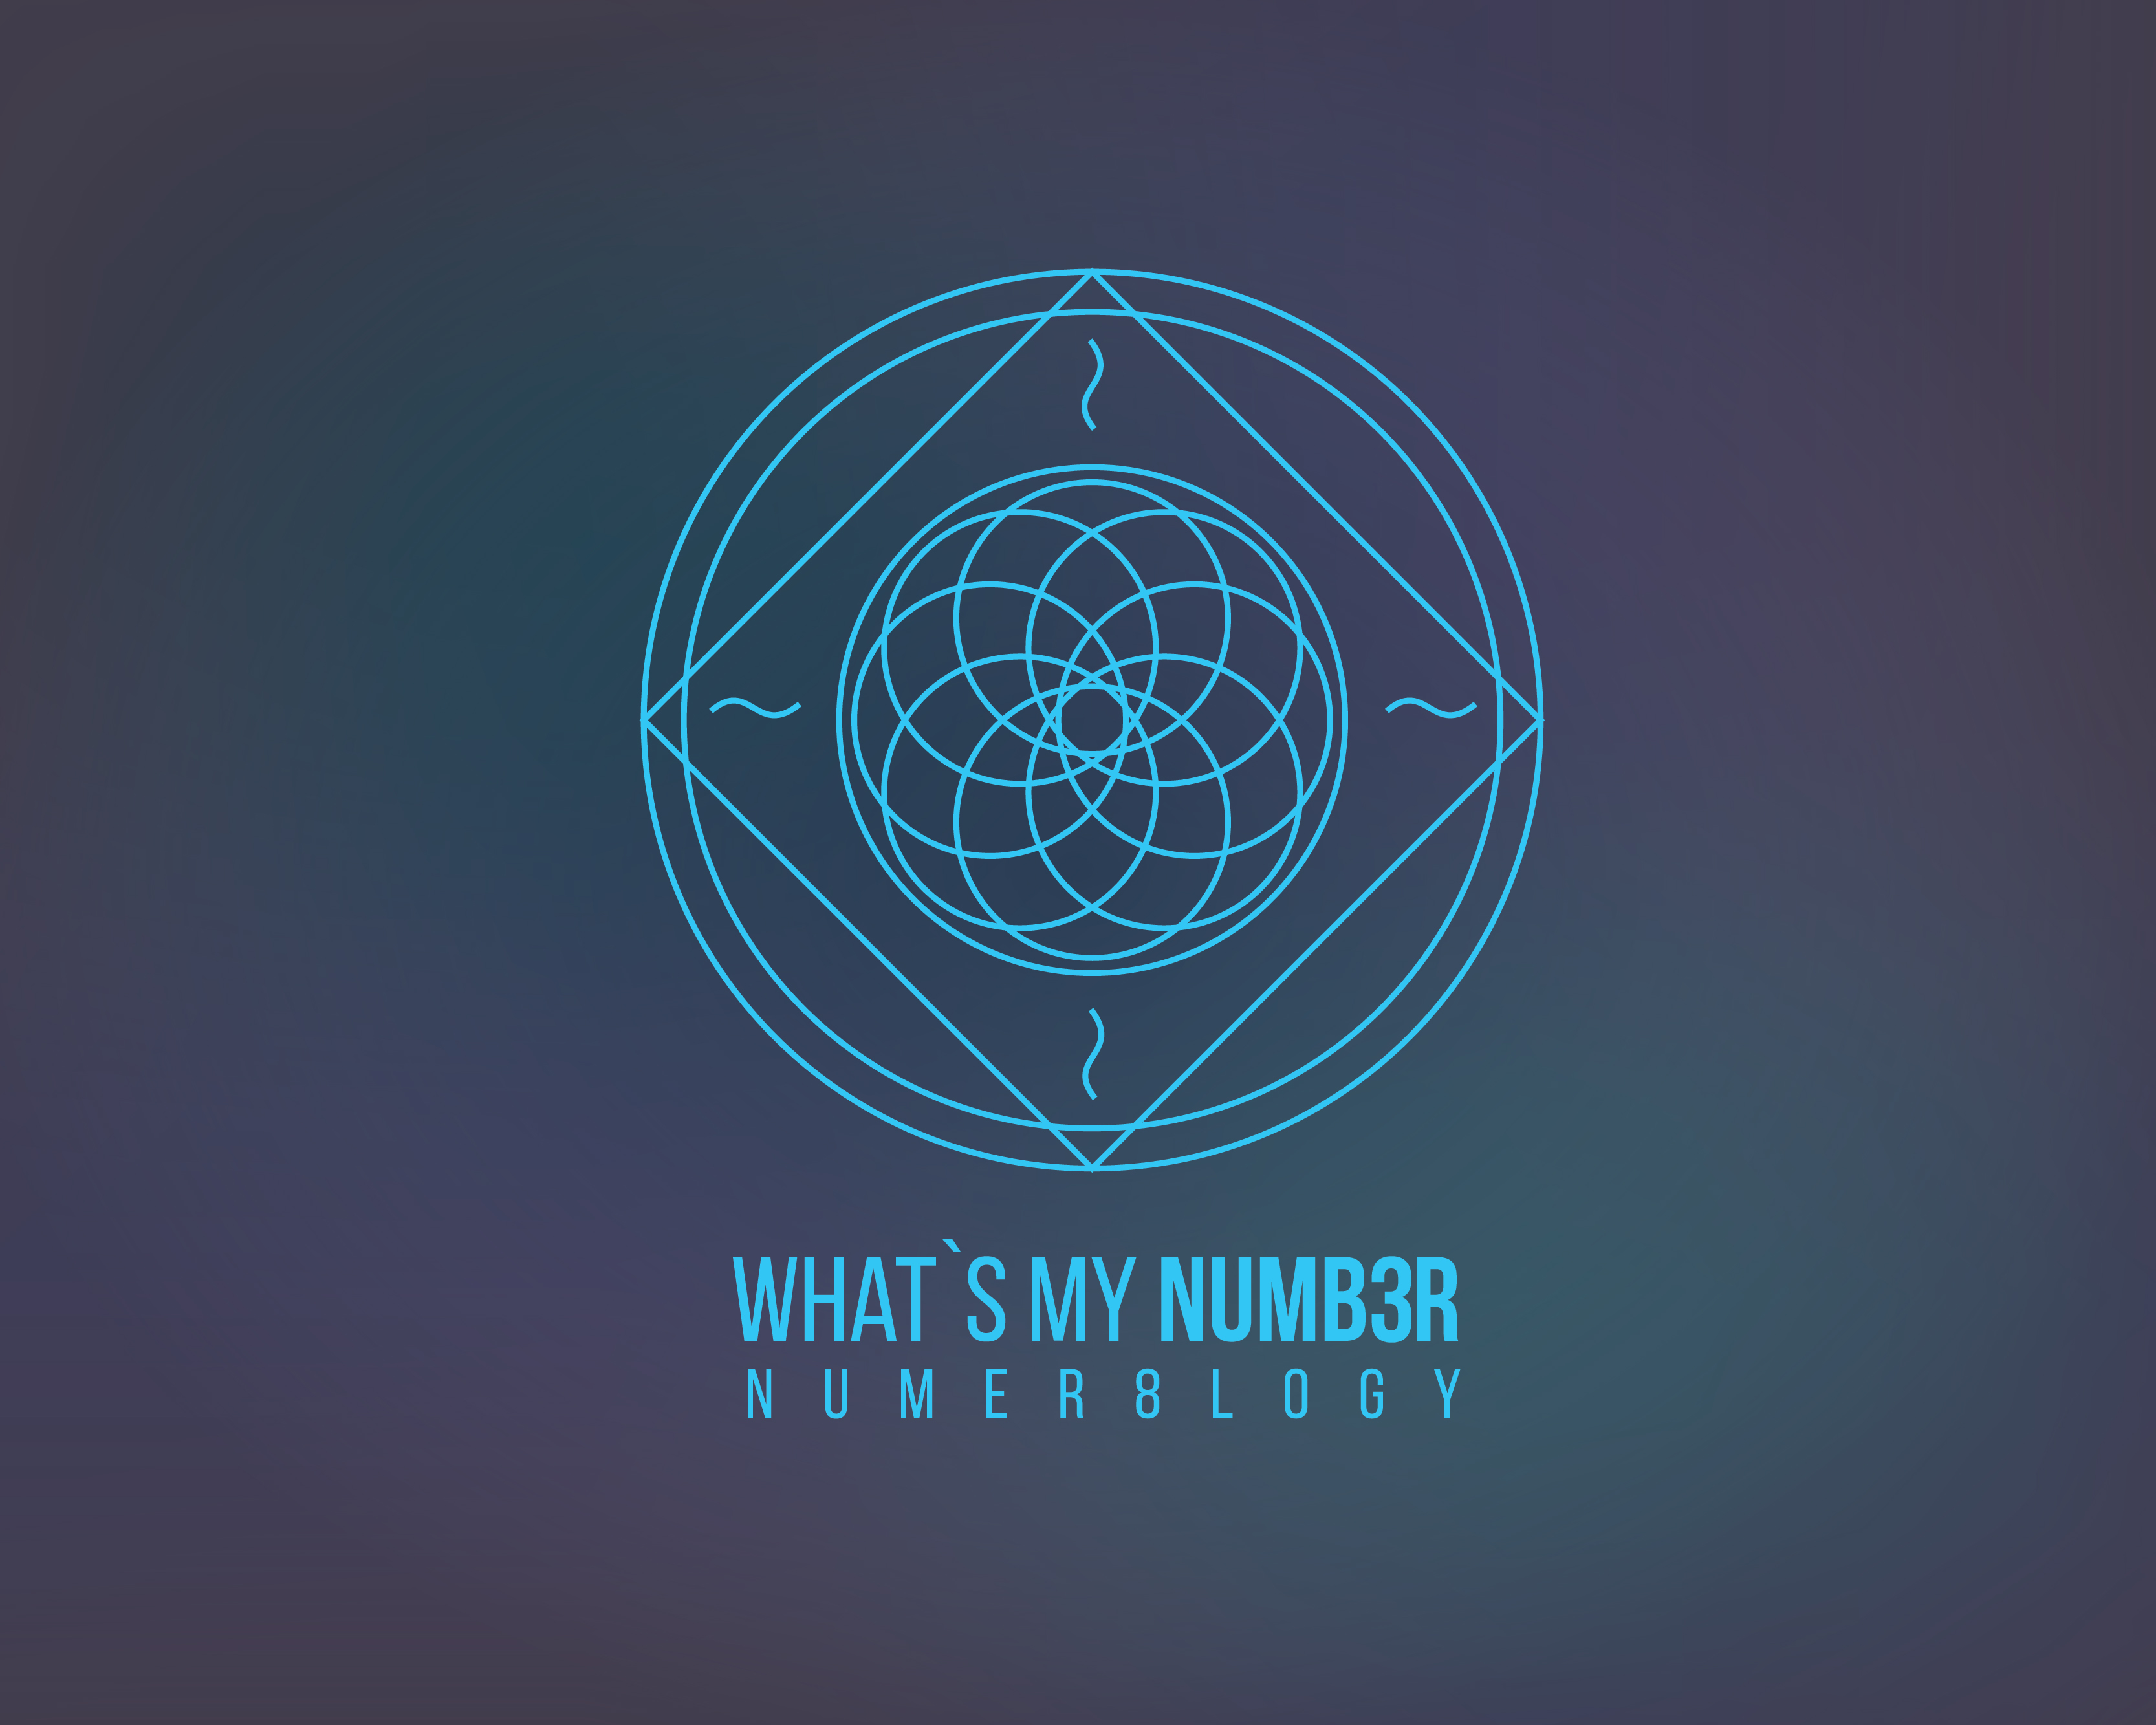 Course Of Numerology , transparent png download